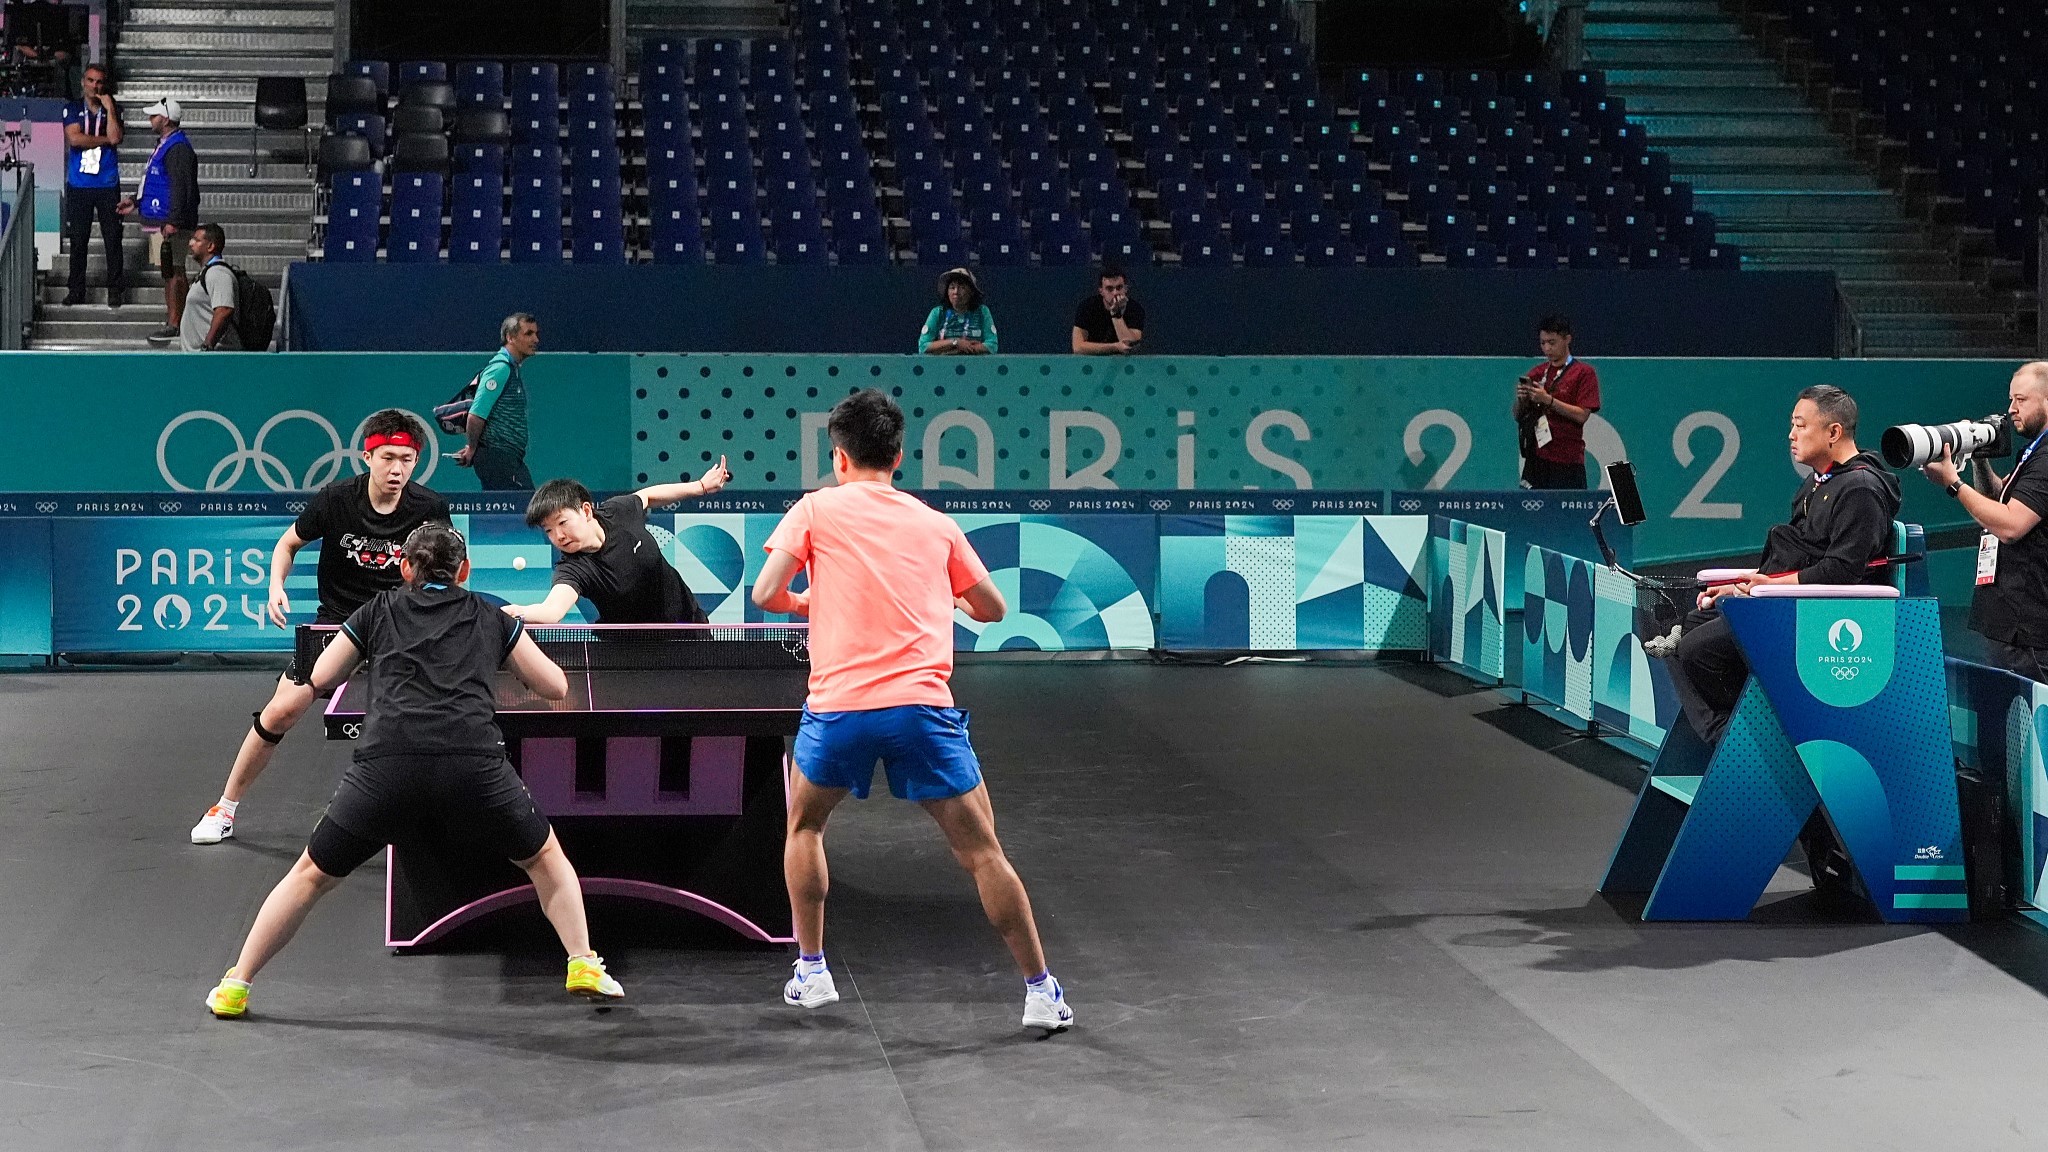 Chinese table tennis players practice at venue ahead of 2024 Olympics